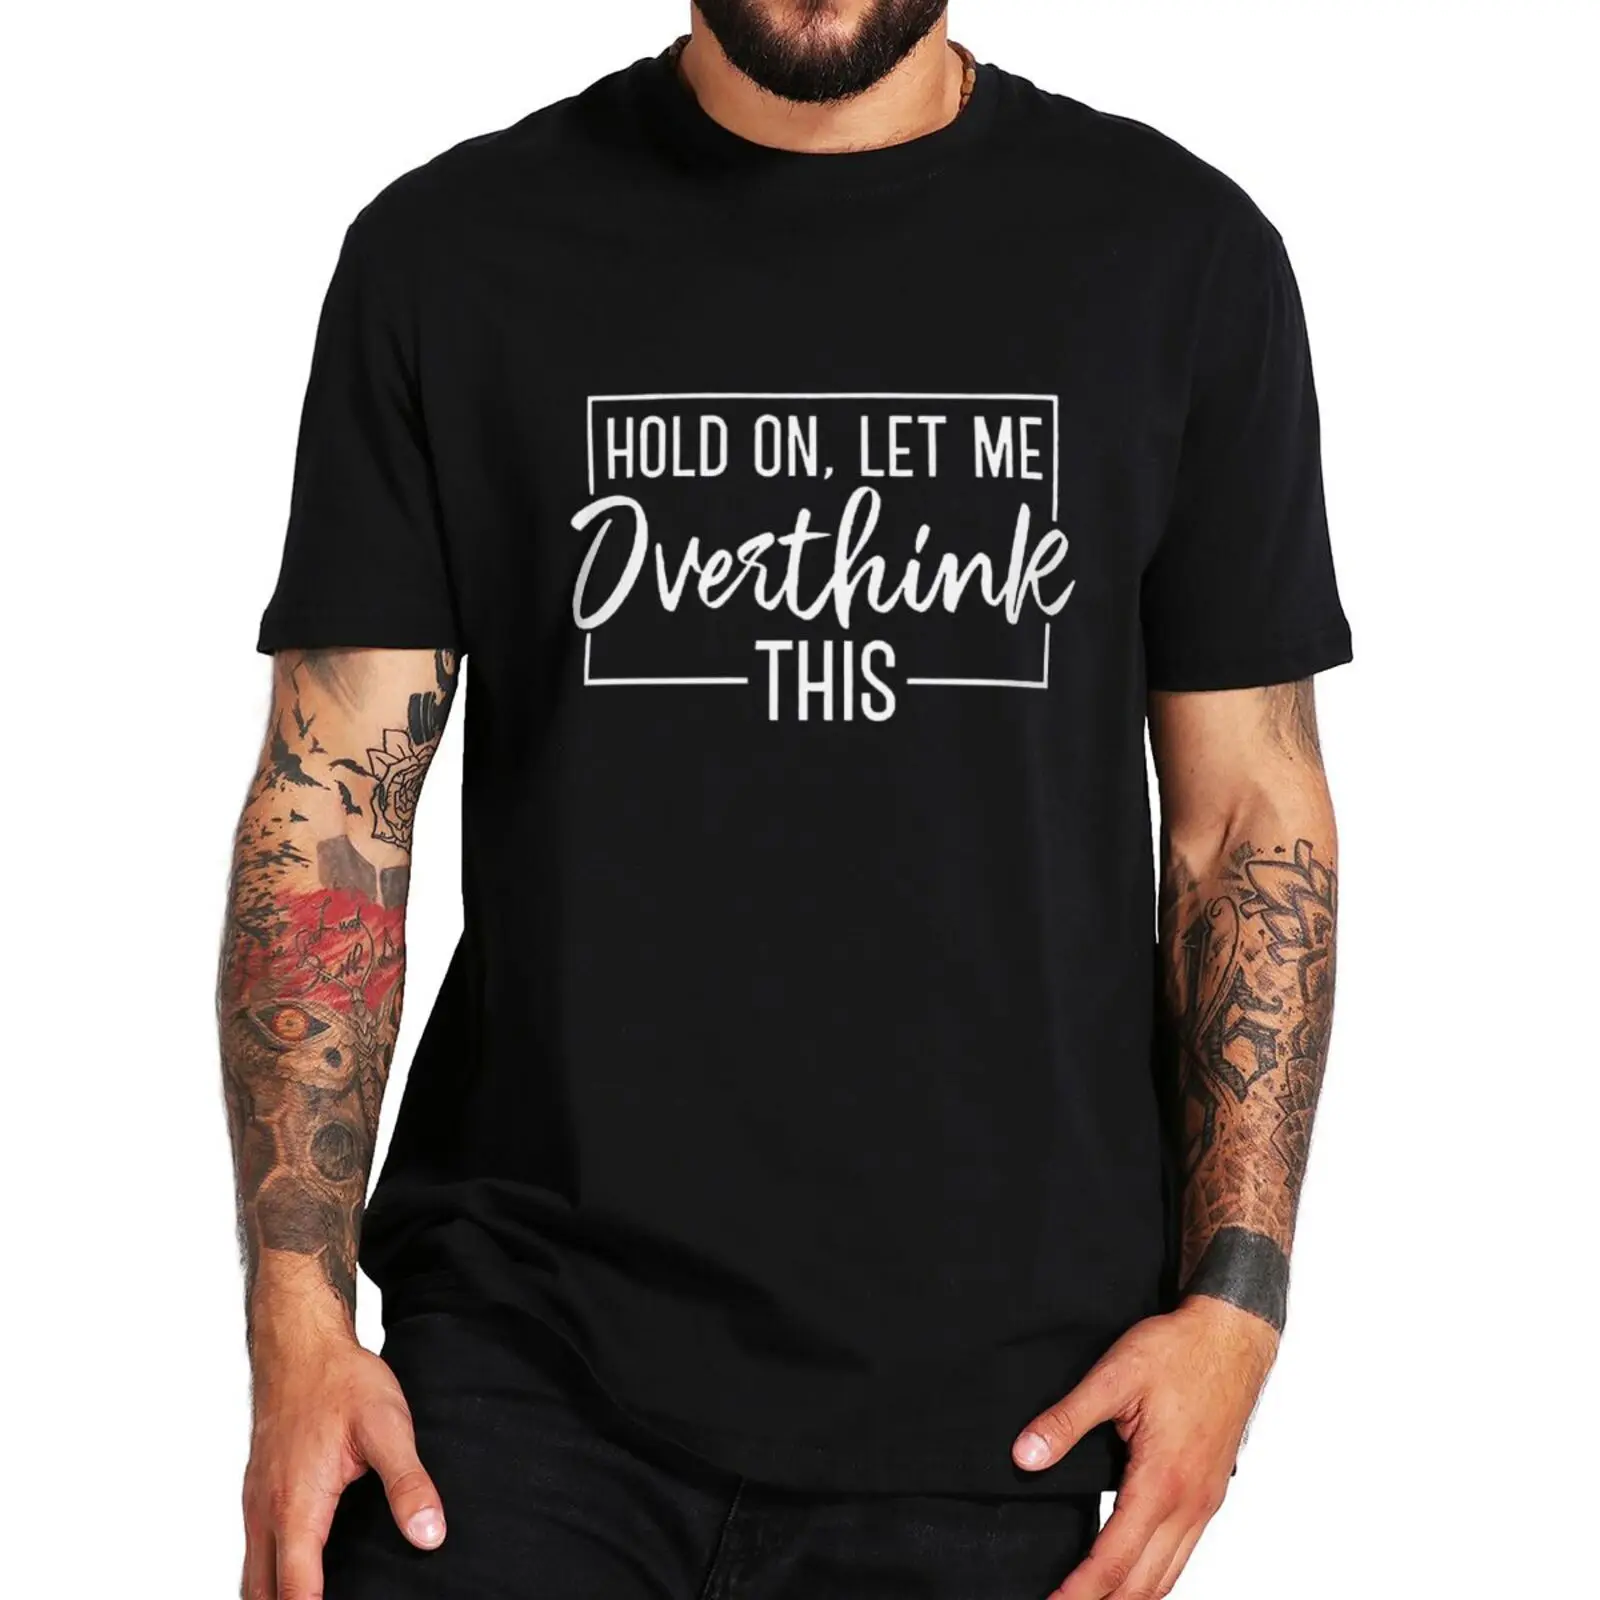 

Hold On Let Me Overthink This T-shirt Funny Slogan Humor Gift Graphic Tee Tops EU Size Cotton Summer Casual Unsiex T Shirt